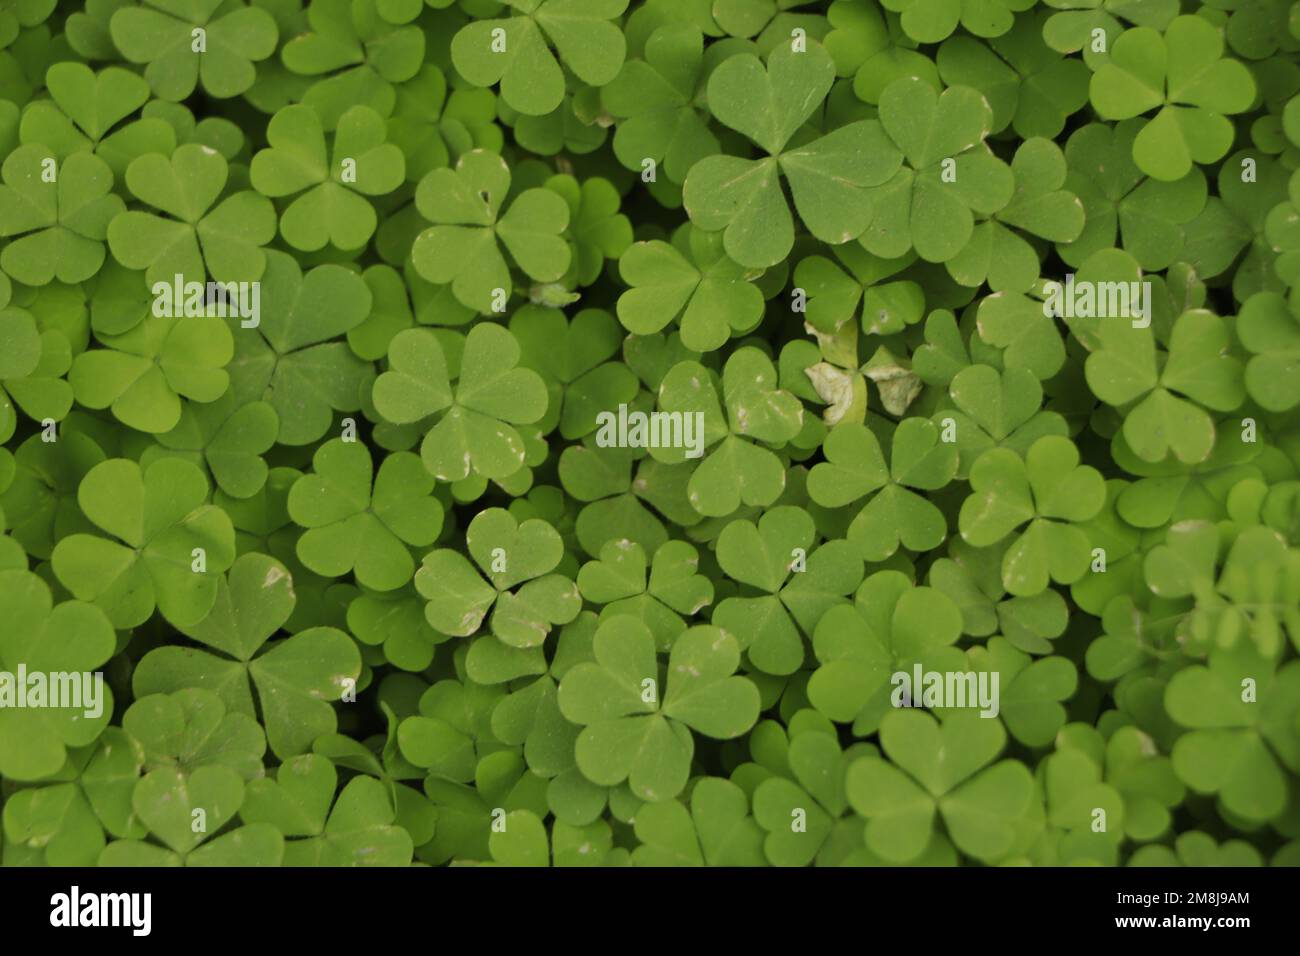 Small green leaves pattern background, Natural background and wallpaper. Stock Photo